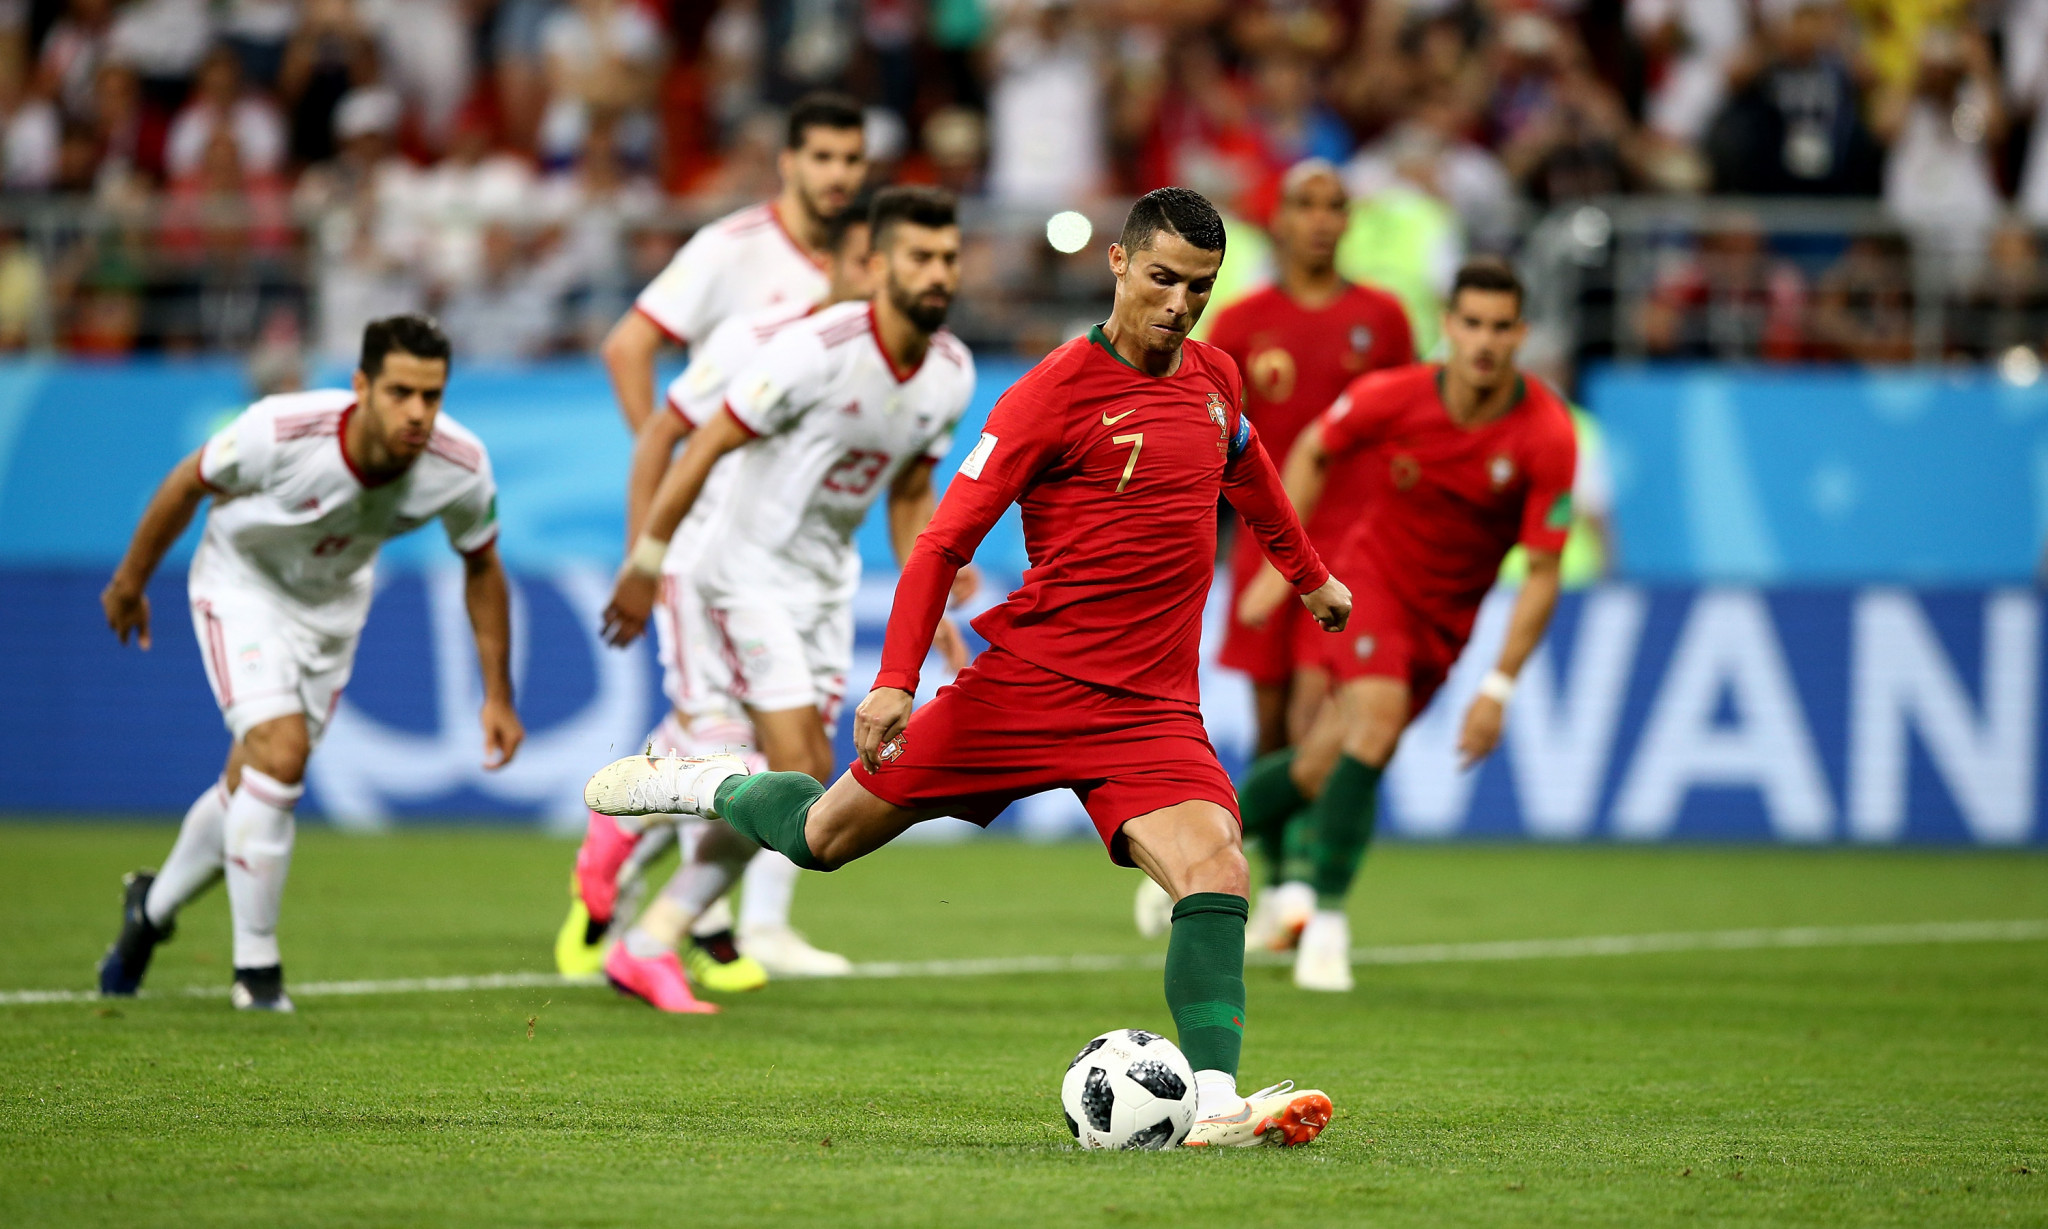 Cristiano Ronaldo missed a penalty awarded via VAR and avoided being sent off during Portugal's draw with Iran ©Getty Images